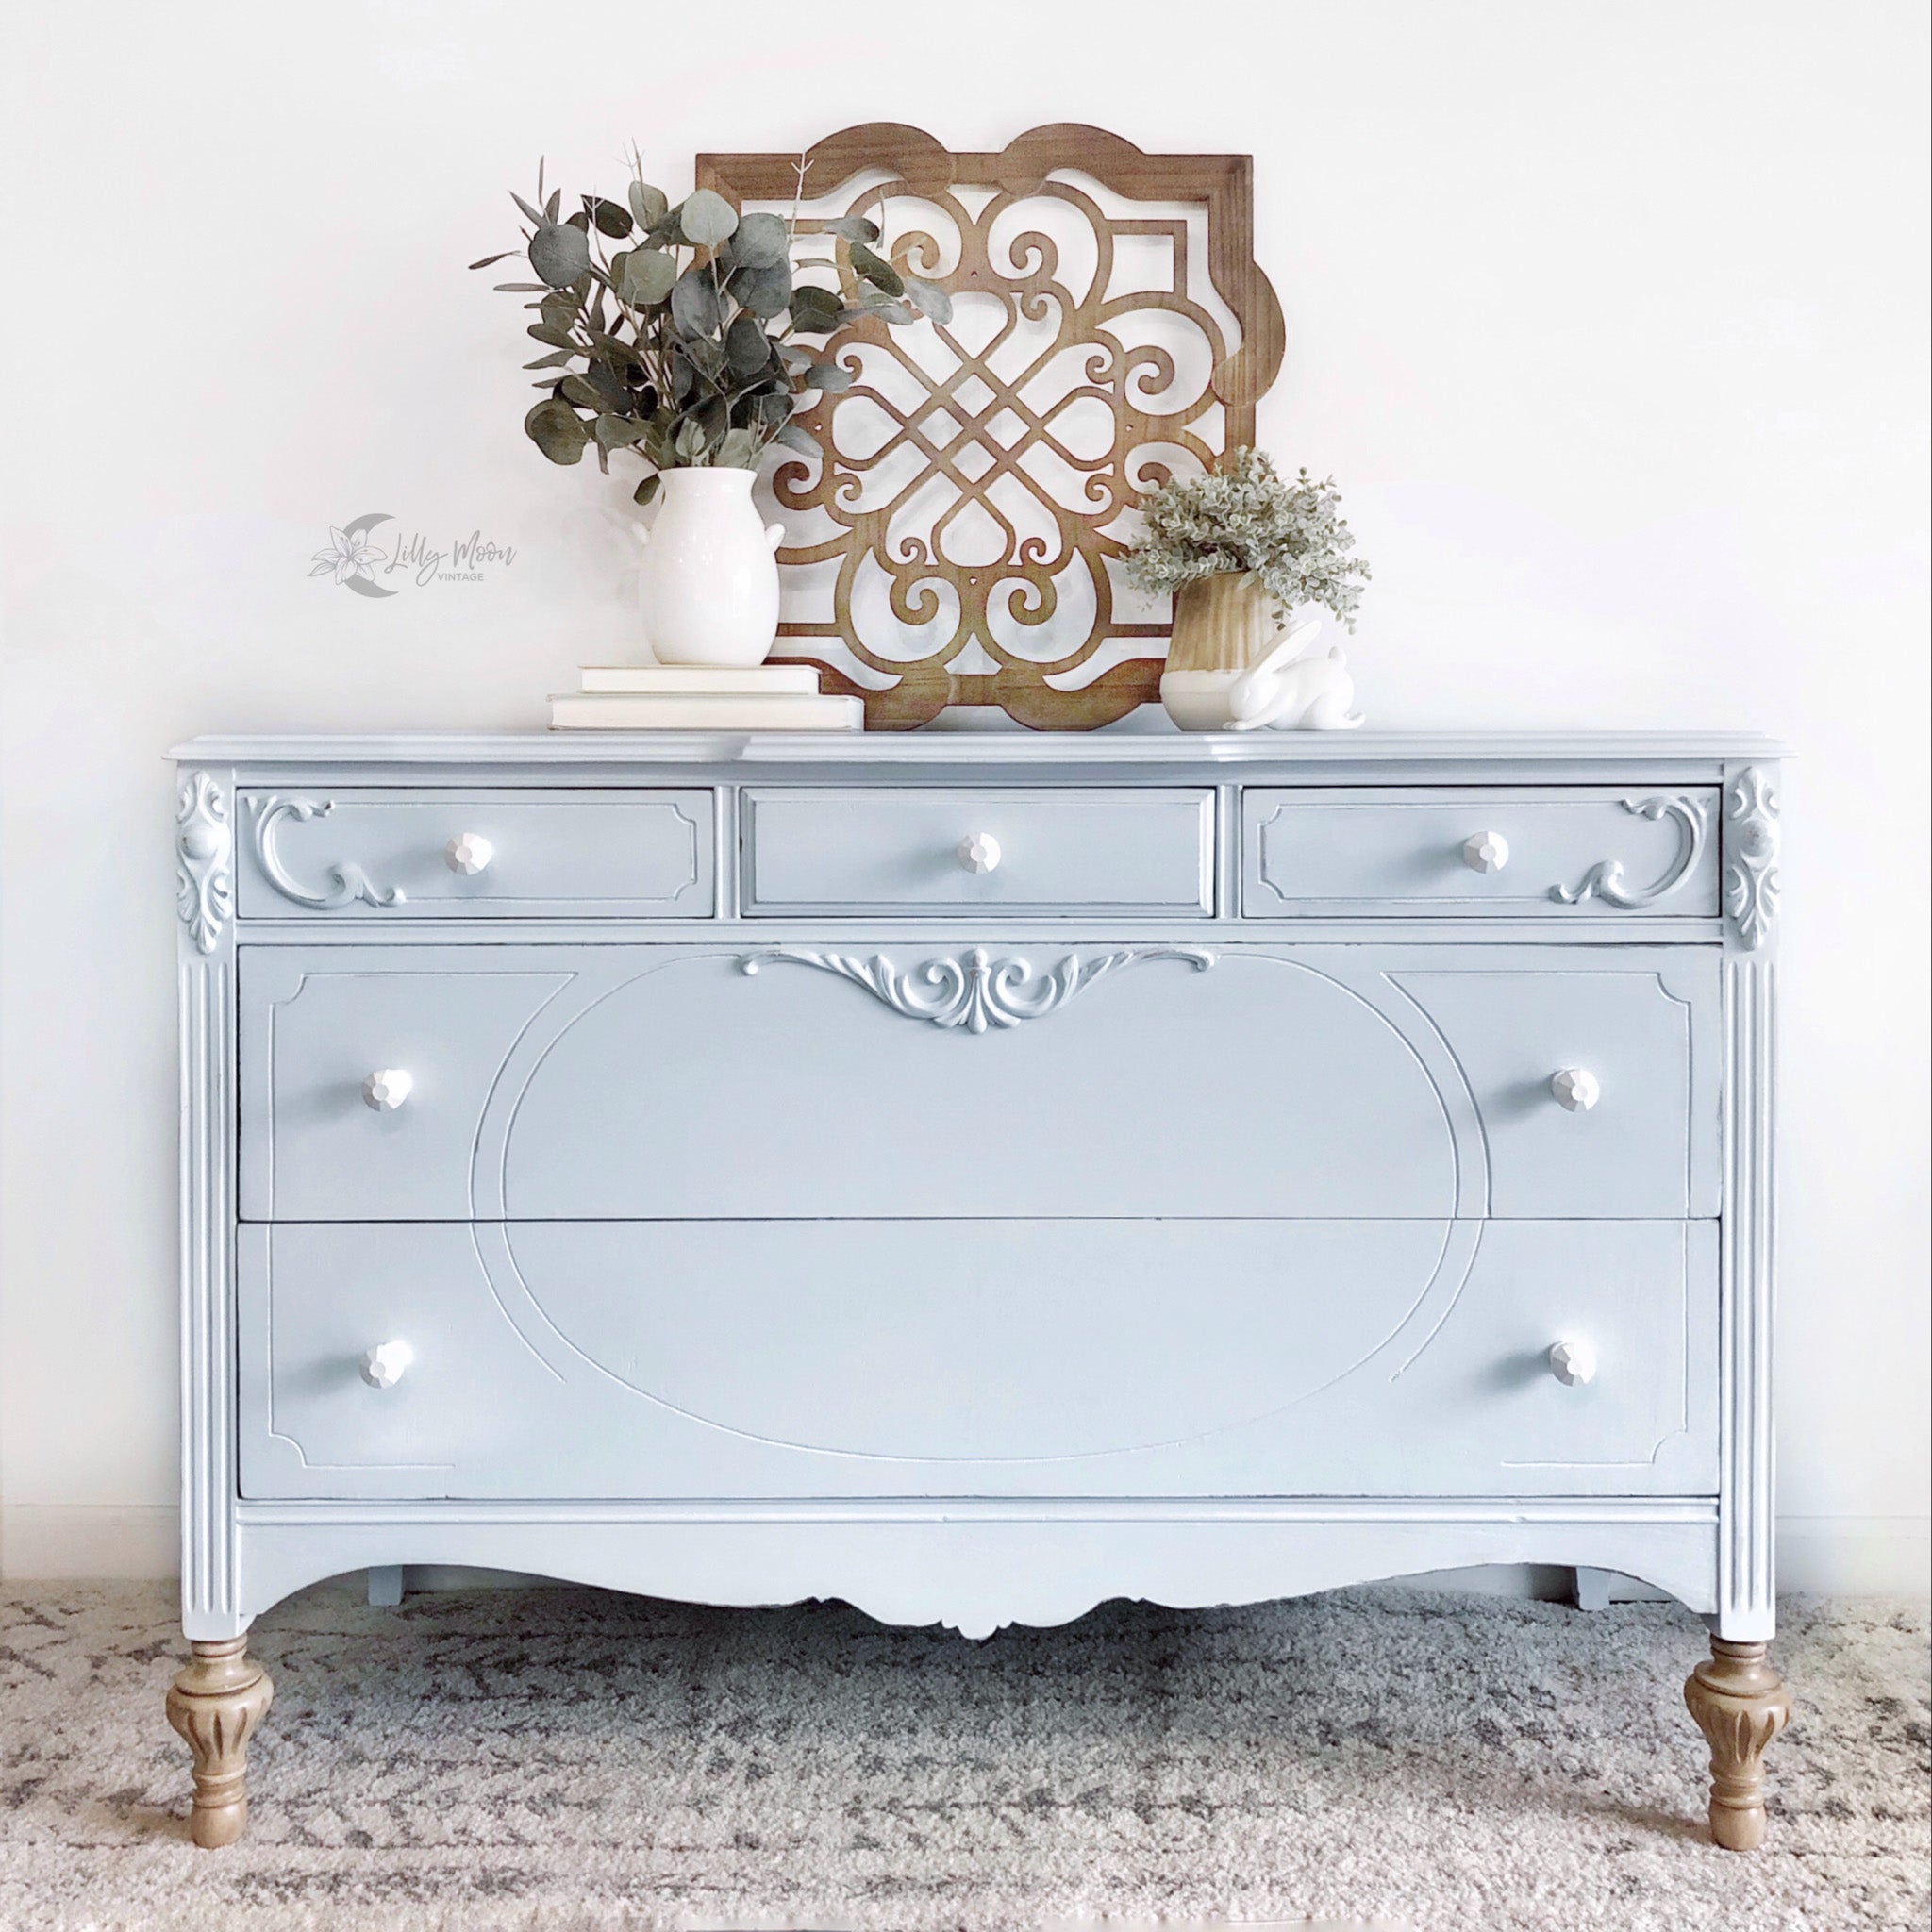 A vintage 5-drawer dresser refurbished by Lilly Moon Vintage is painted in Dixie Belle's Haint Blue chalk mineral paint.